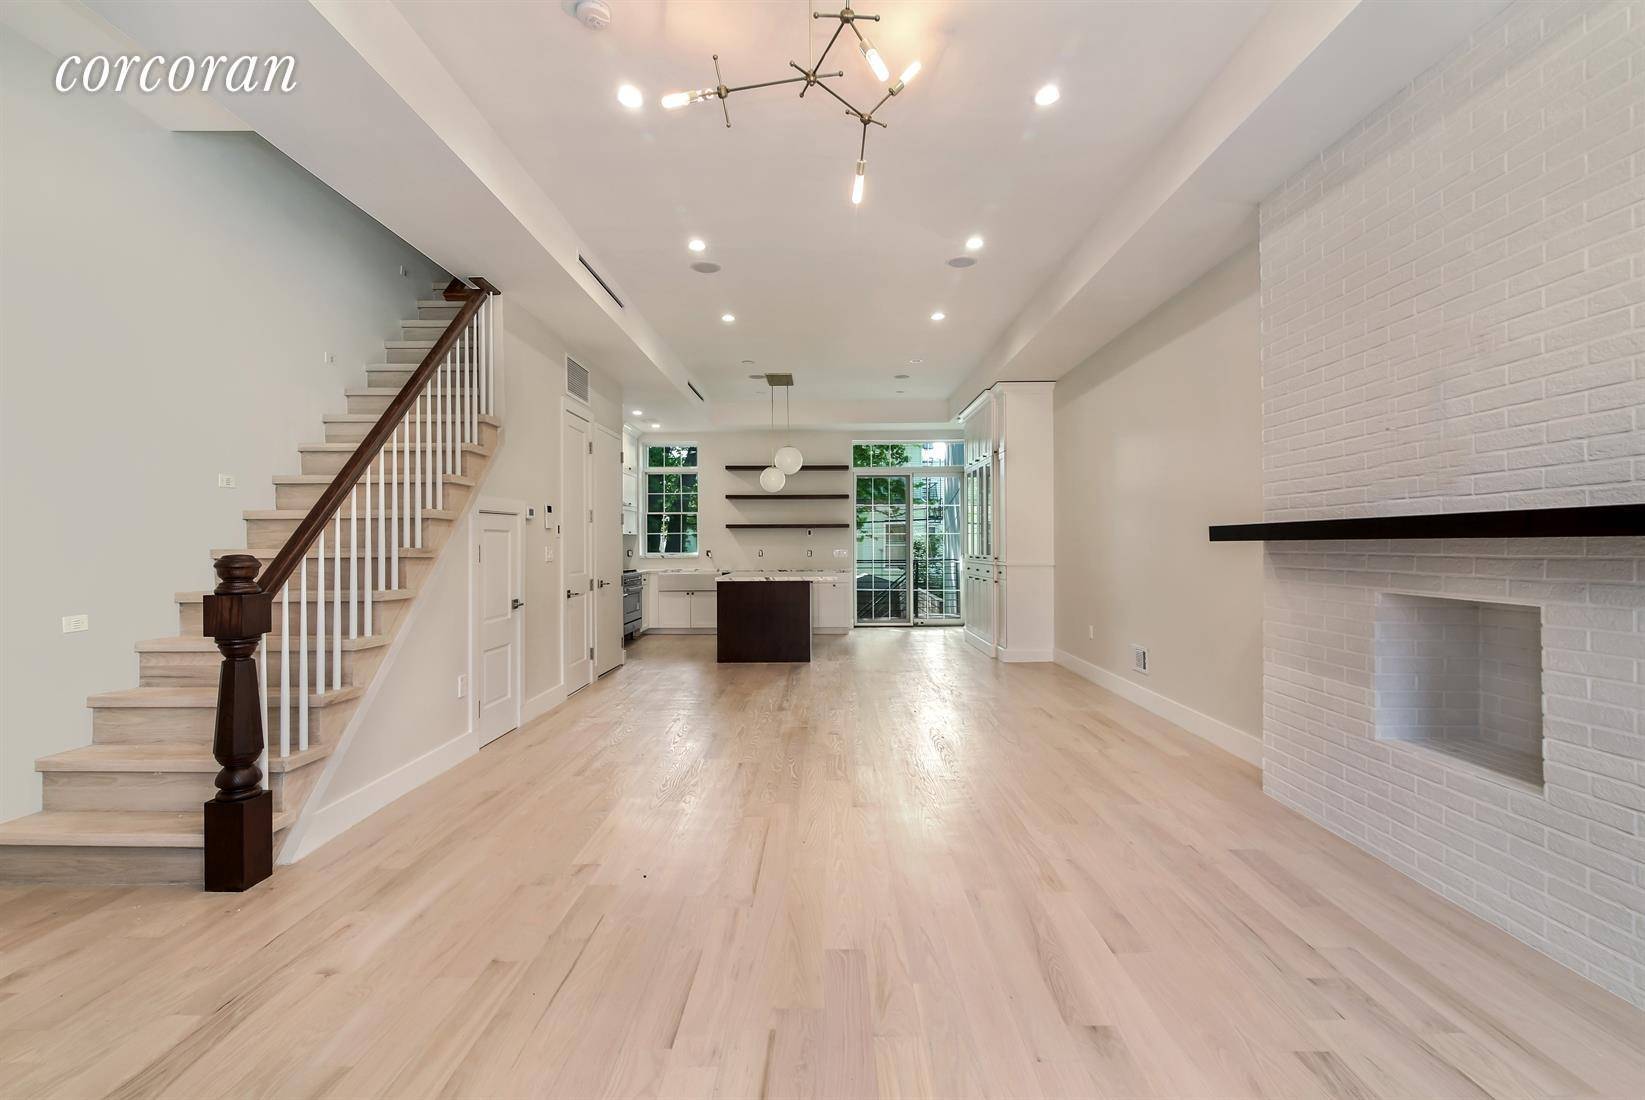 Classic meets modern design at this gut renovated 20ft wide upper triplex 4 bedroom, 2.